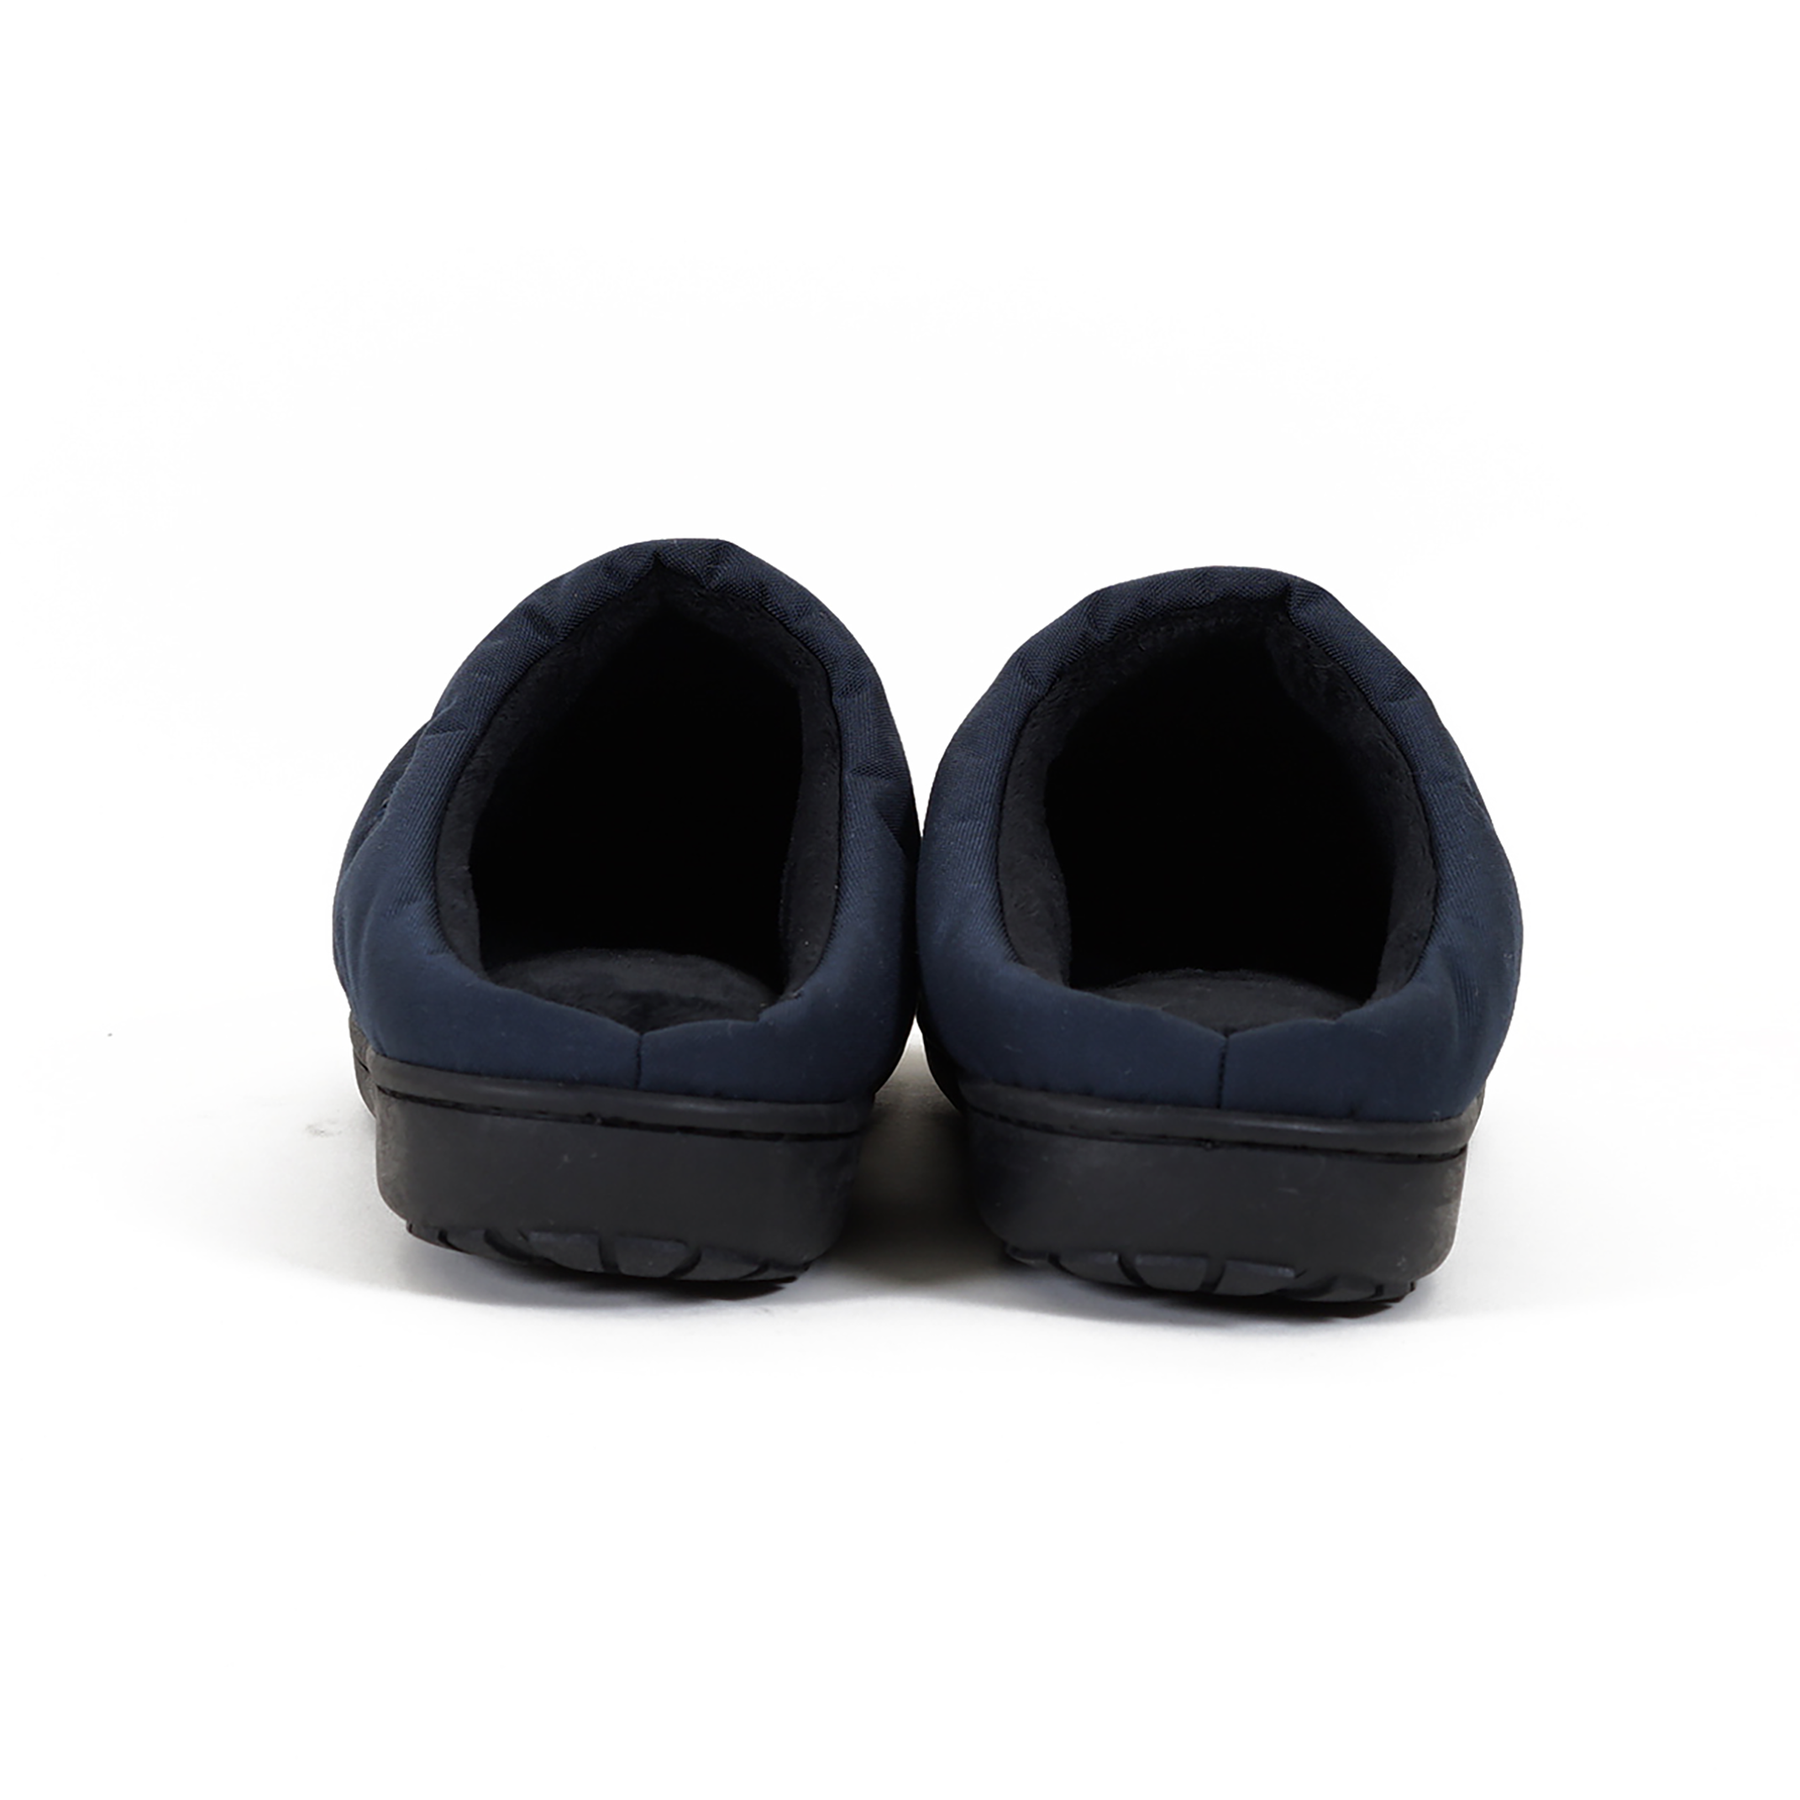 SUBU, Nannen Outdoor Slippers Navy, Size, 1, Slippers,